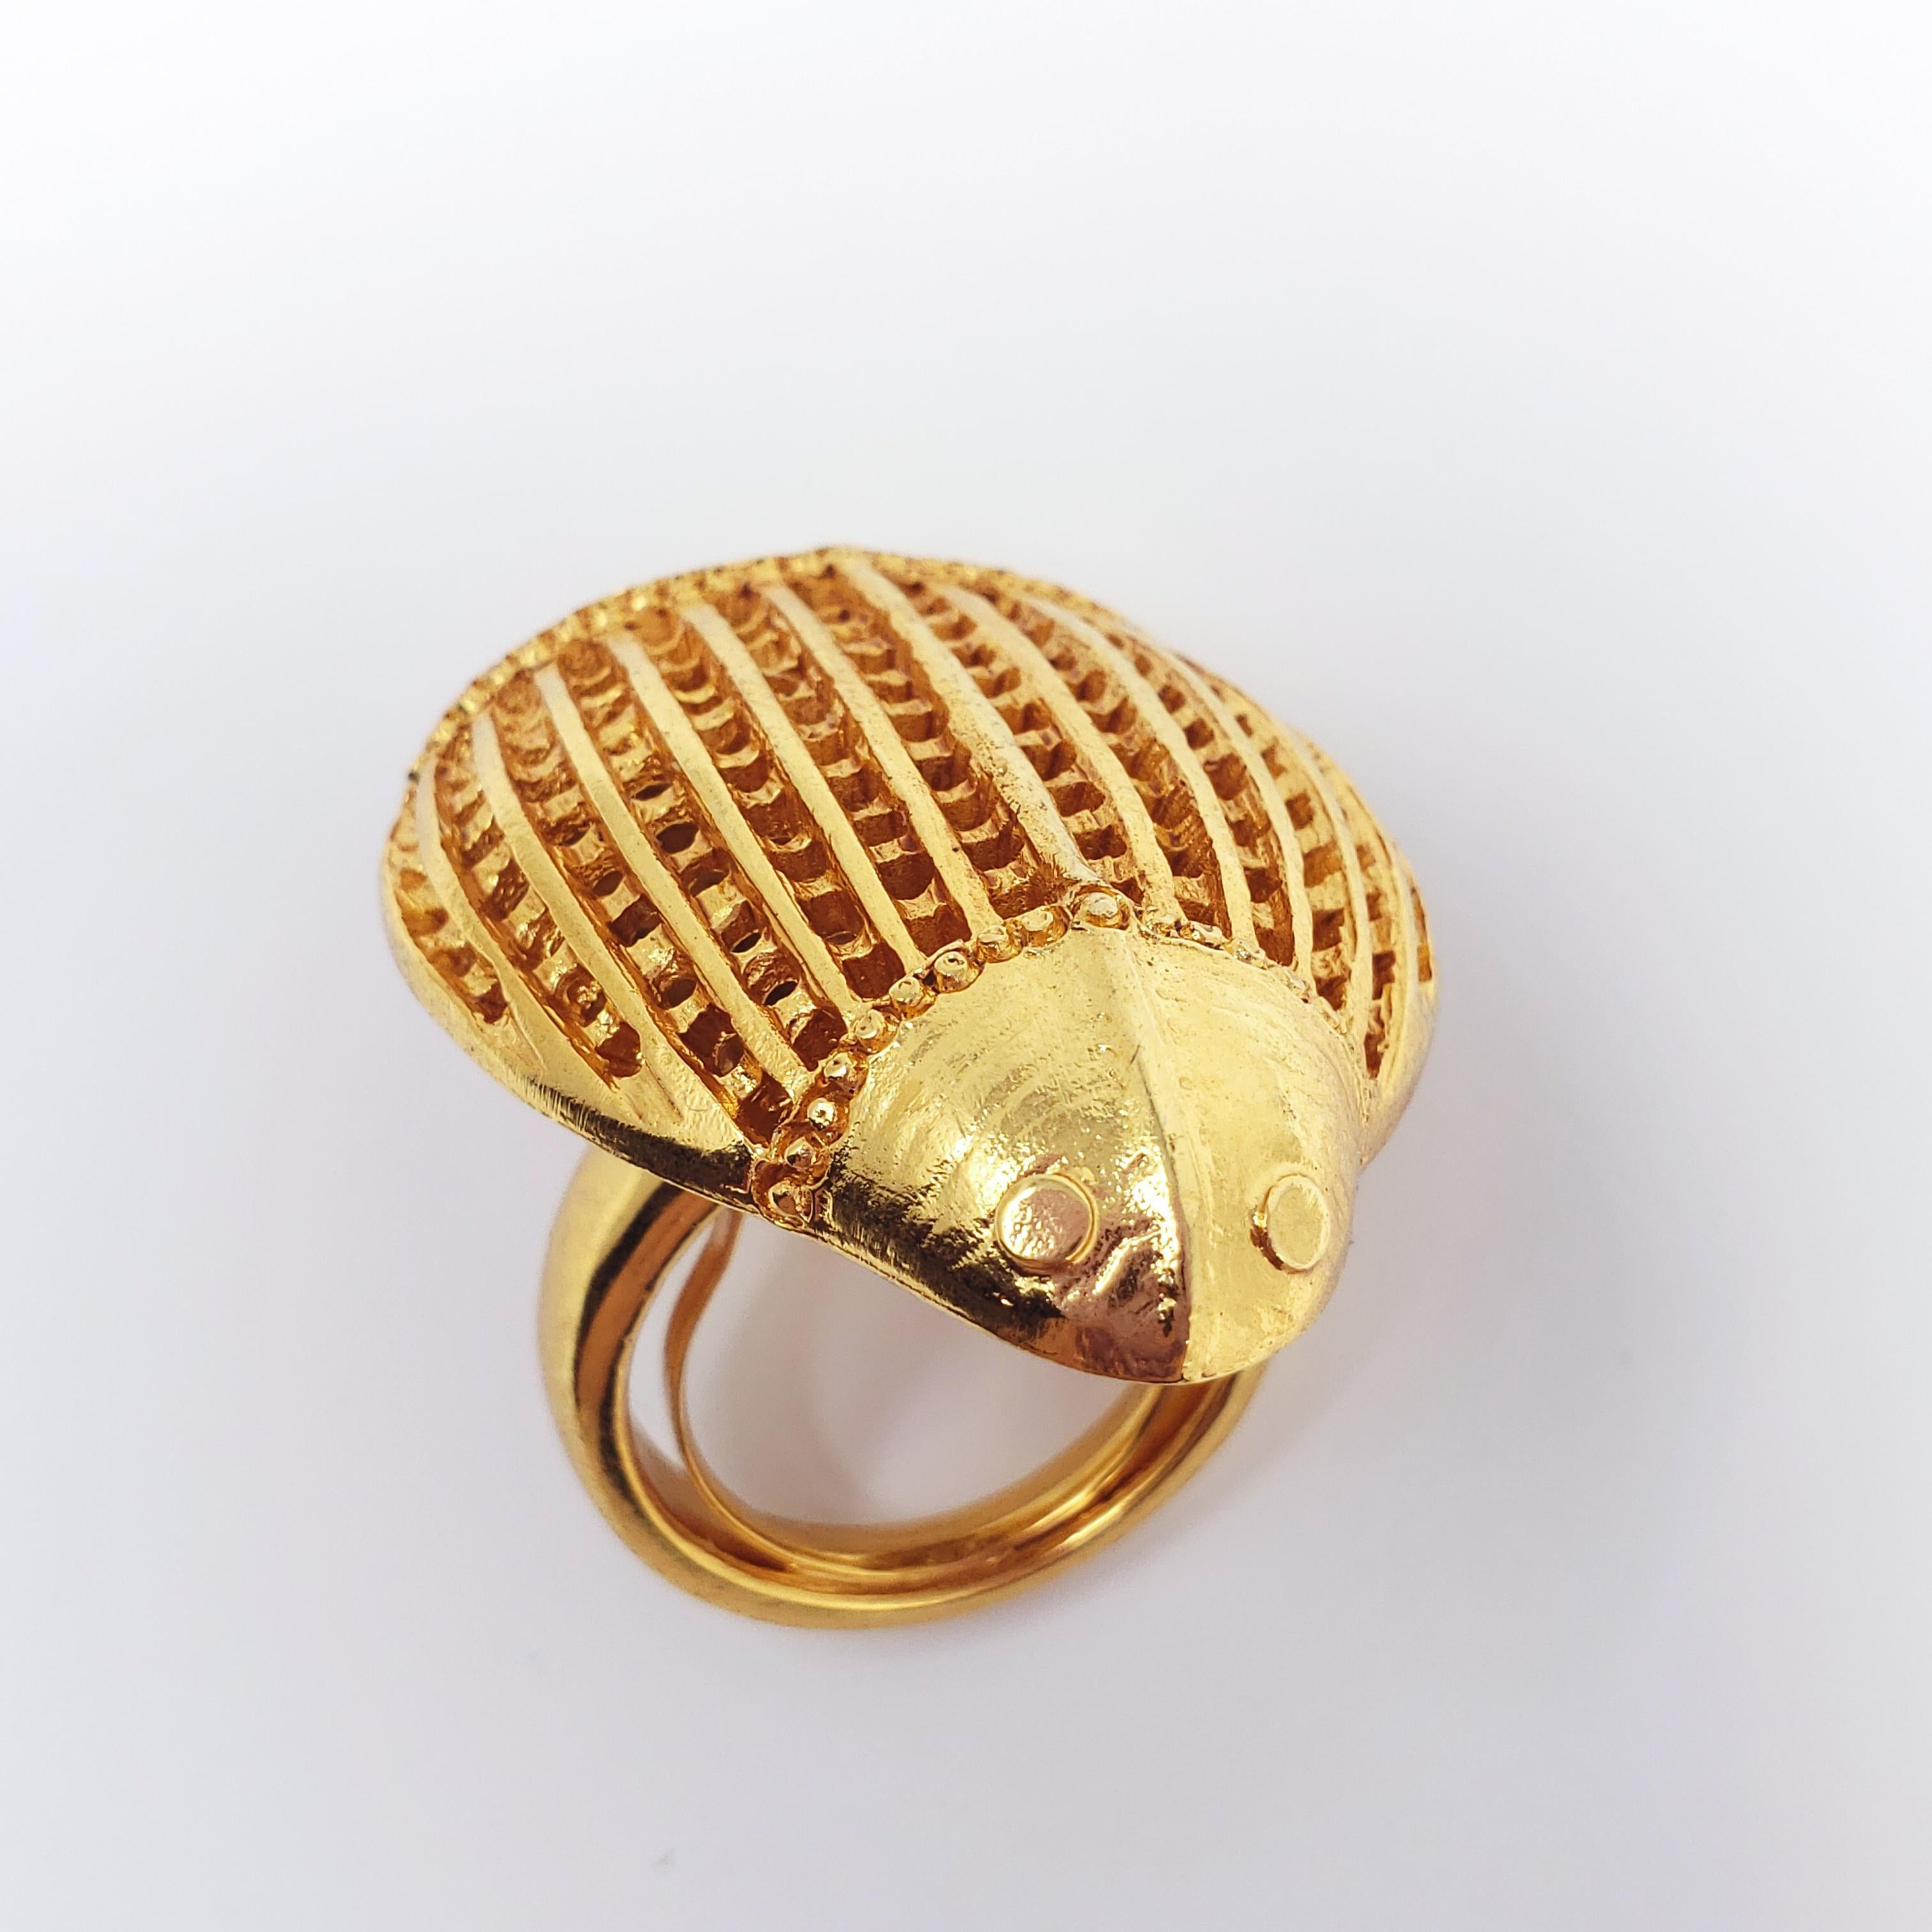 A bold gold ring by Oscar de la Renta featuring a large scarab motif. The scarab's back is composed of a mesh-pattern for a unique touch.

Size: Adjustable, US sizes 4-8
Scarab dimensions: 4.1 x 3.2 inches
Hallmarks: Oscar de la Renta, Made in USA